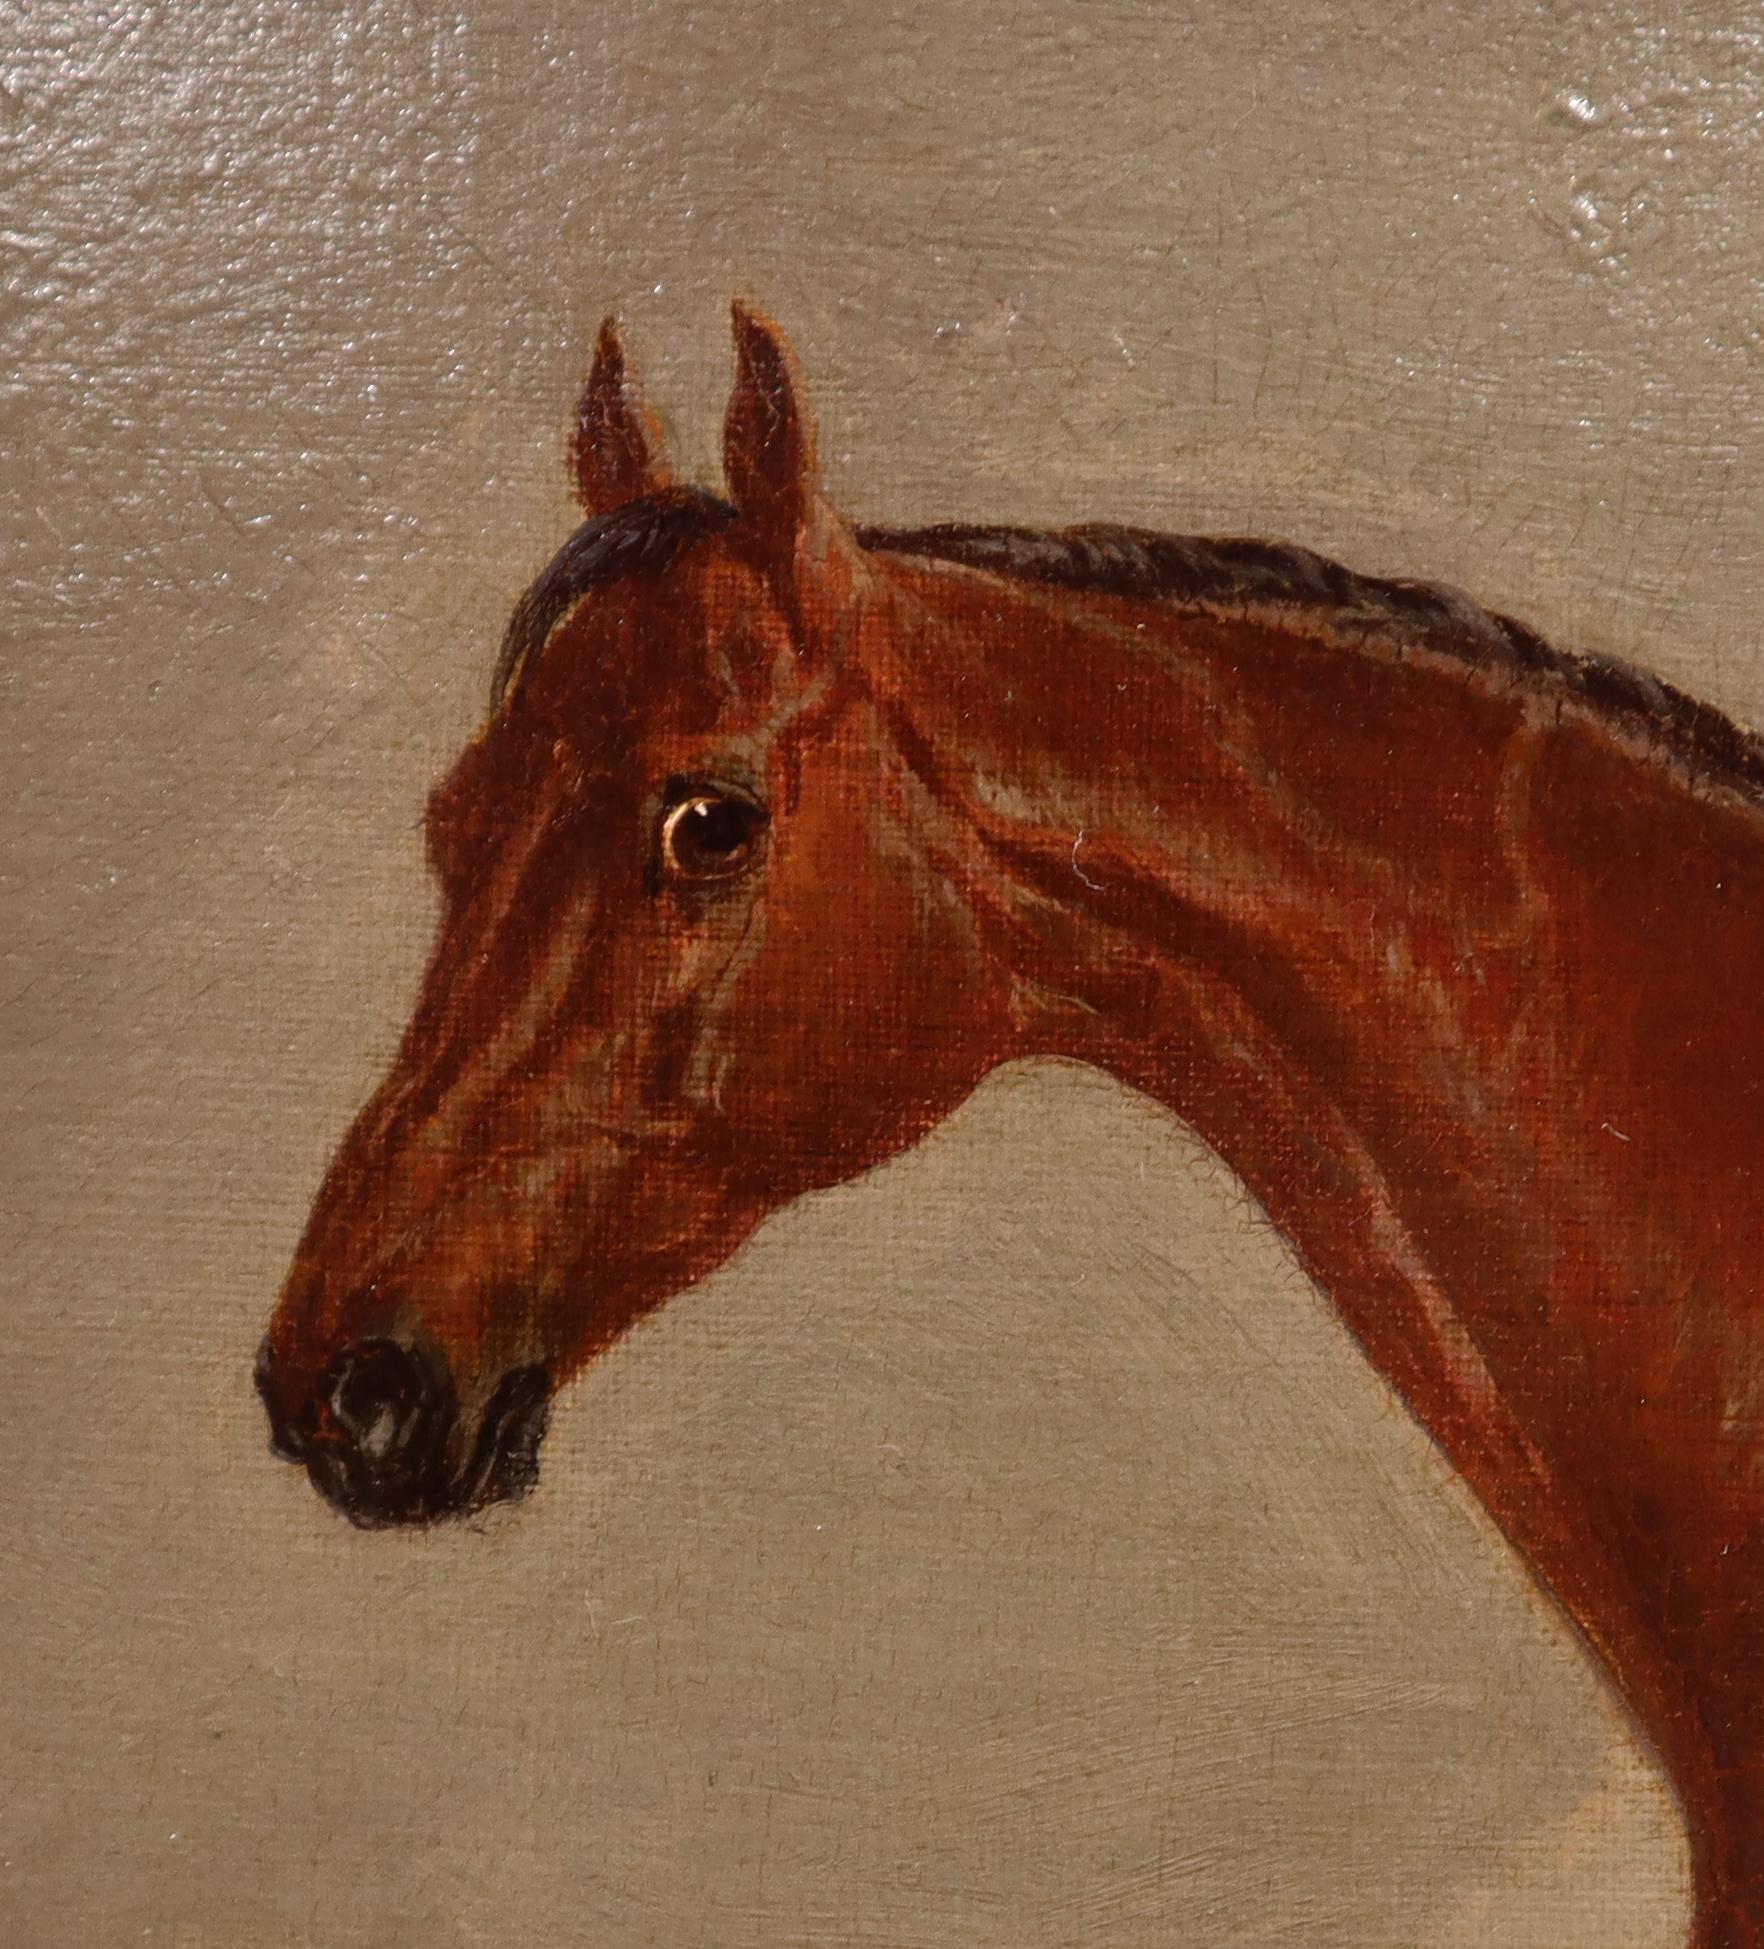 Born in London in 1795, John Frederick Herring is a precocious, self-taught artist who demonstrated a great interest in sketching and drawing horse races. The young artist made his talent recognized by wealthy customers and began his career as a